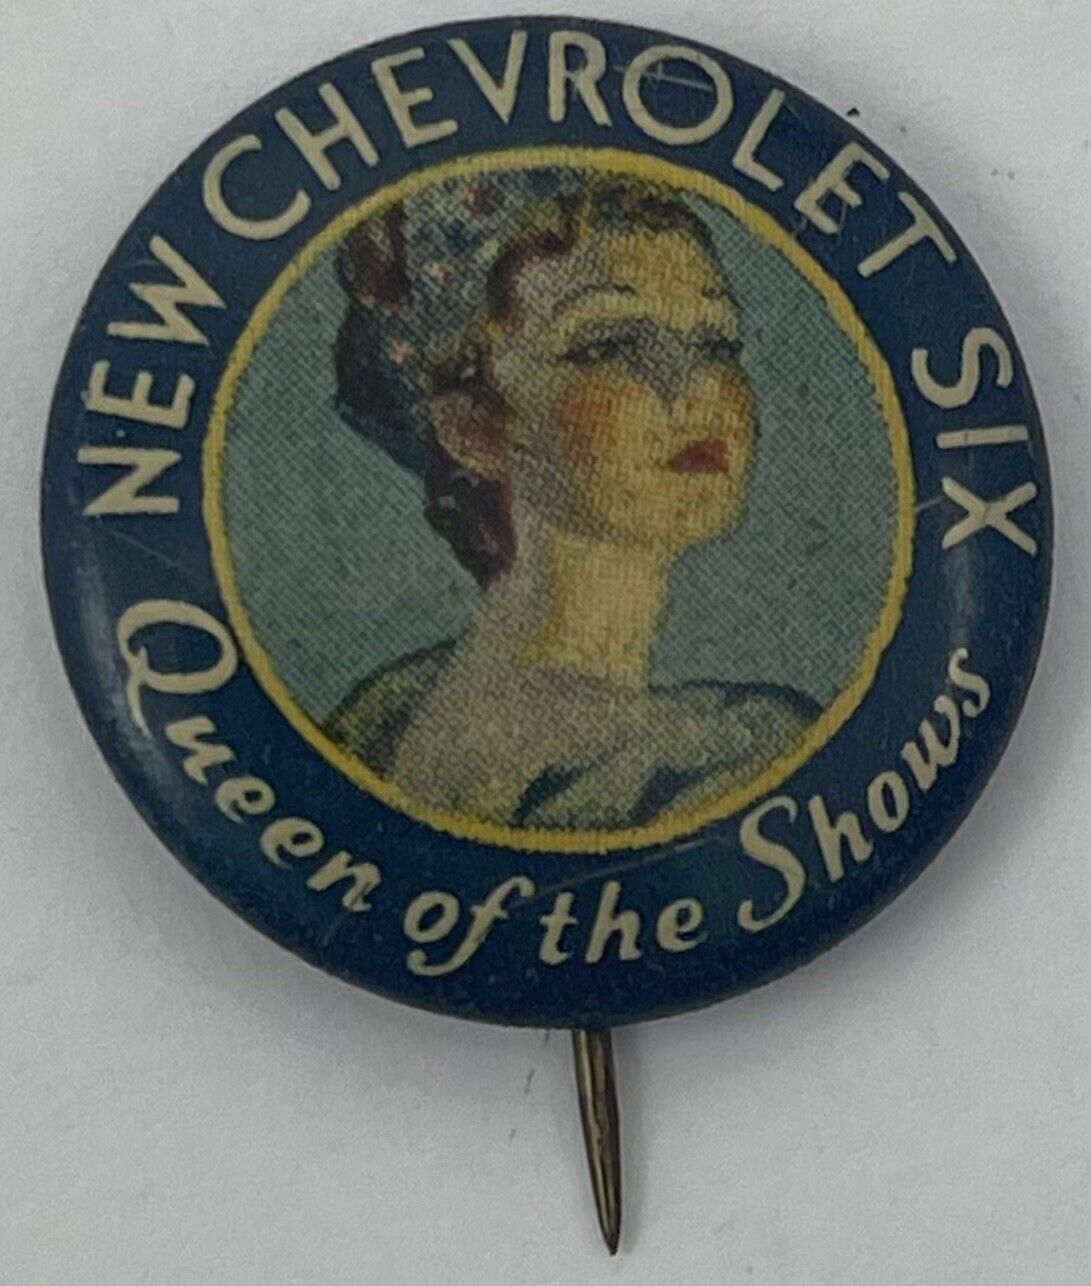 1932 New Chevrolet Six Queen of the Shows Car Automobile Pinback Button